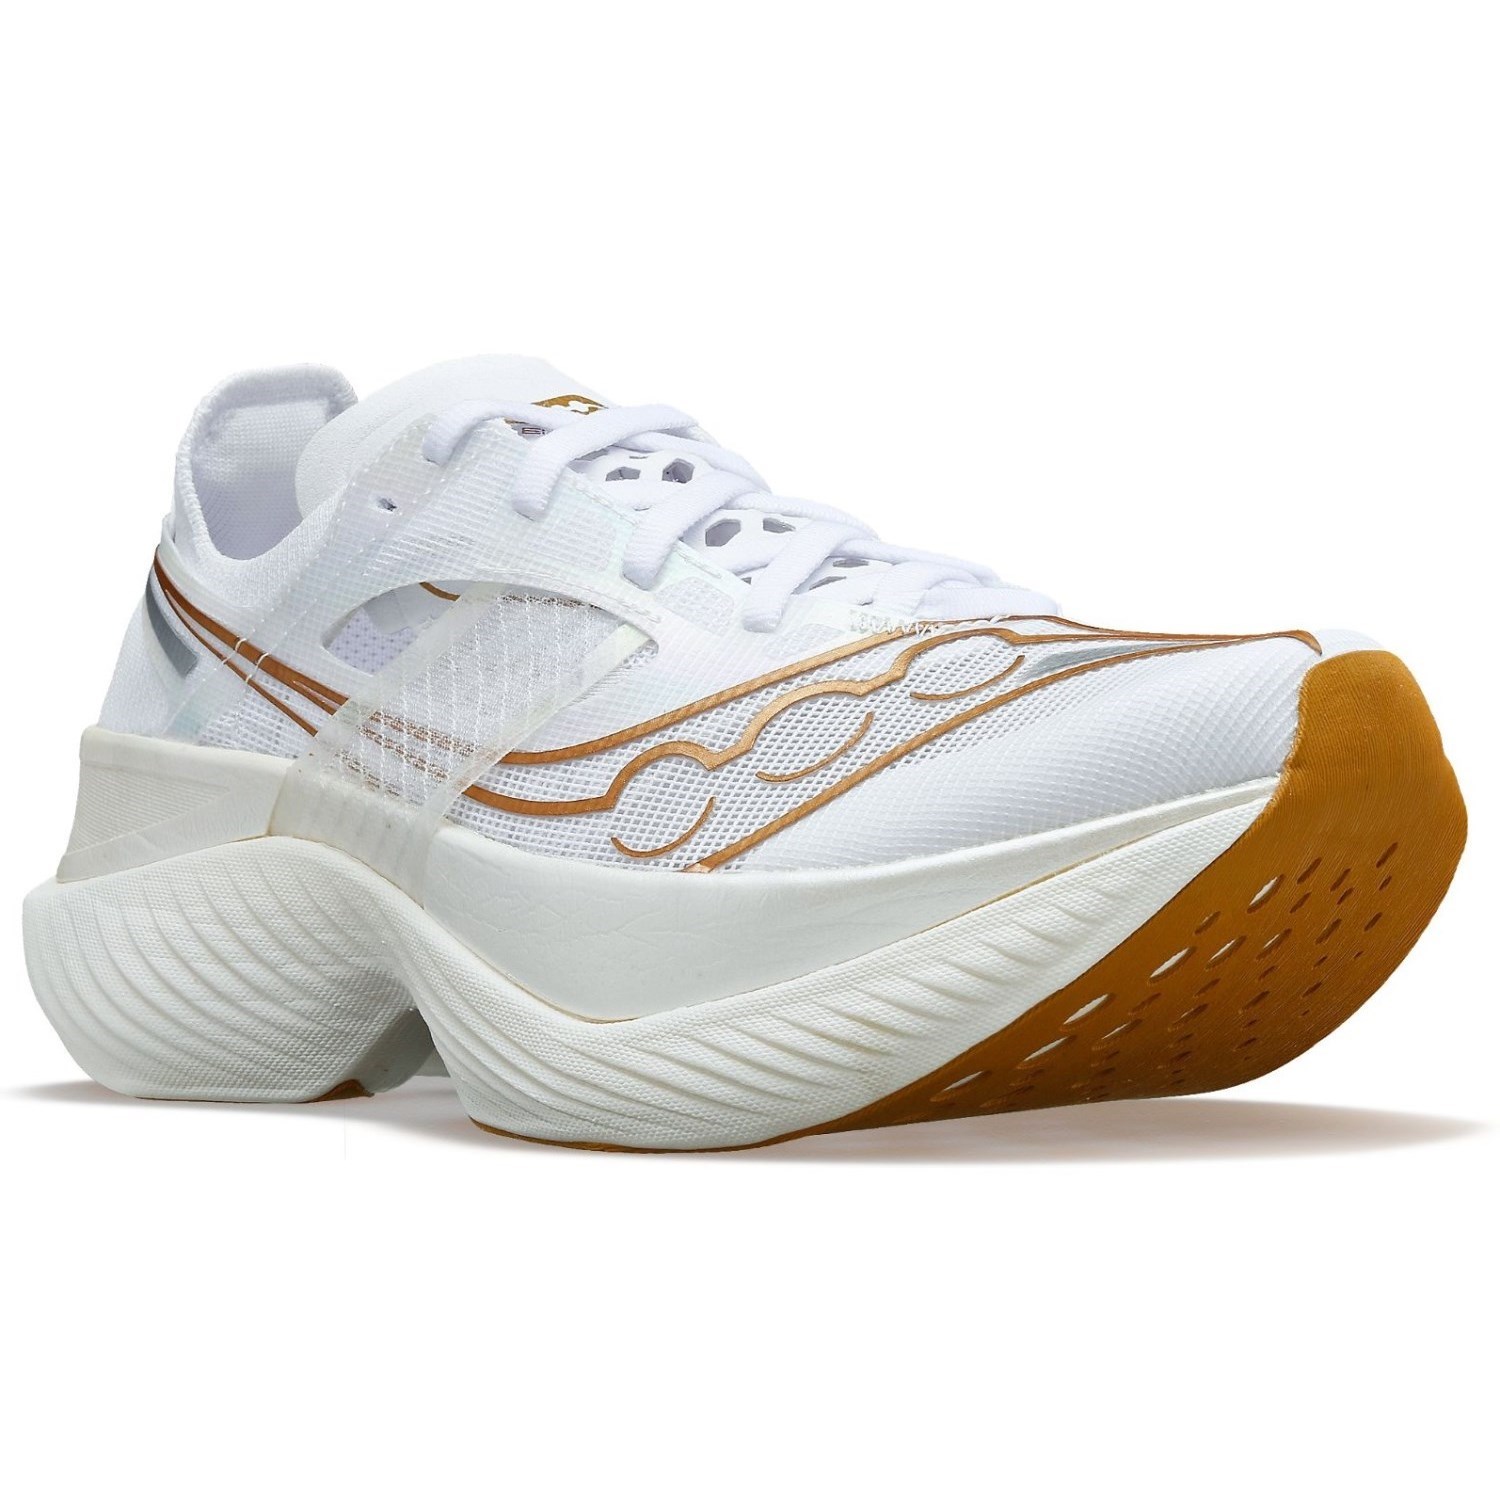 Saucony Endorphin Elite - Womens Road Racing Shoes - White/Gold ...